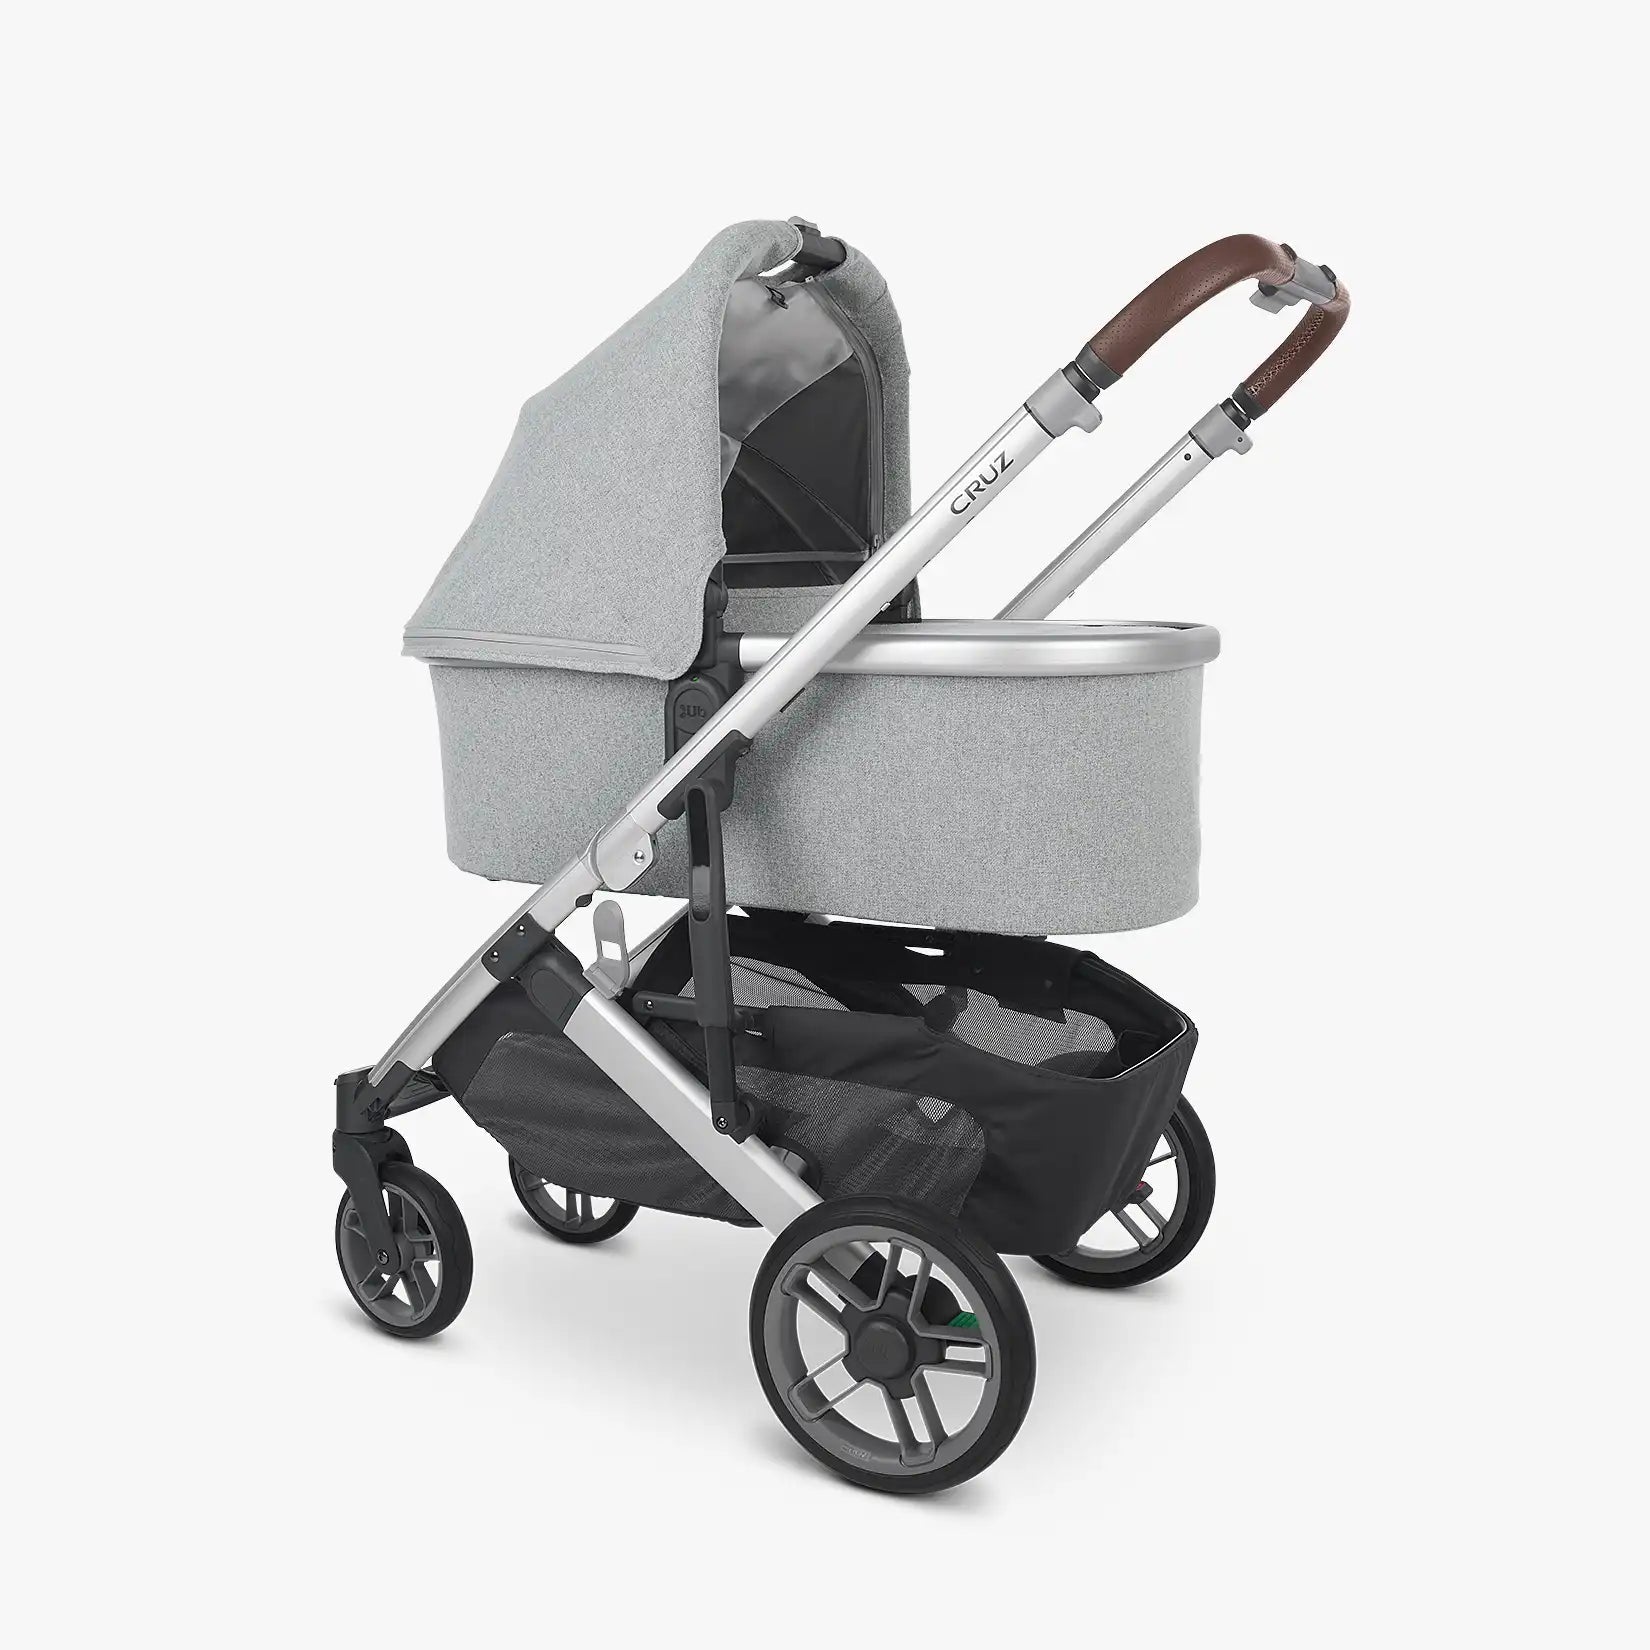 UPPAbaby Bassinet - ANB Baby -810030096535$100 - $300